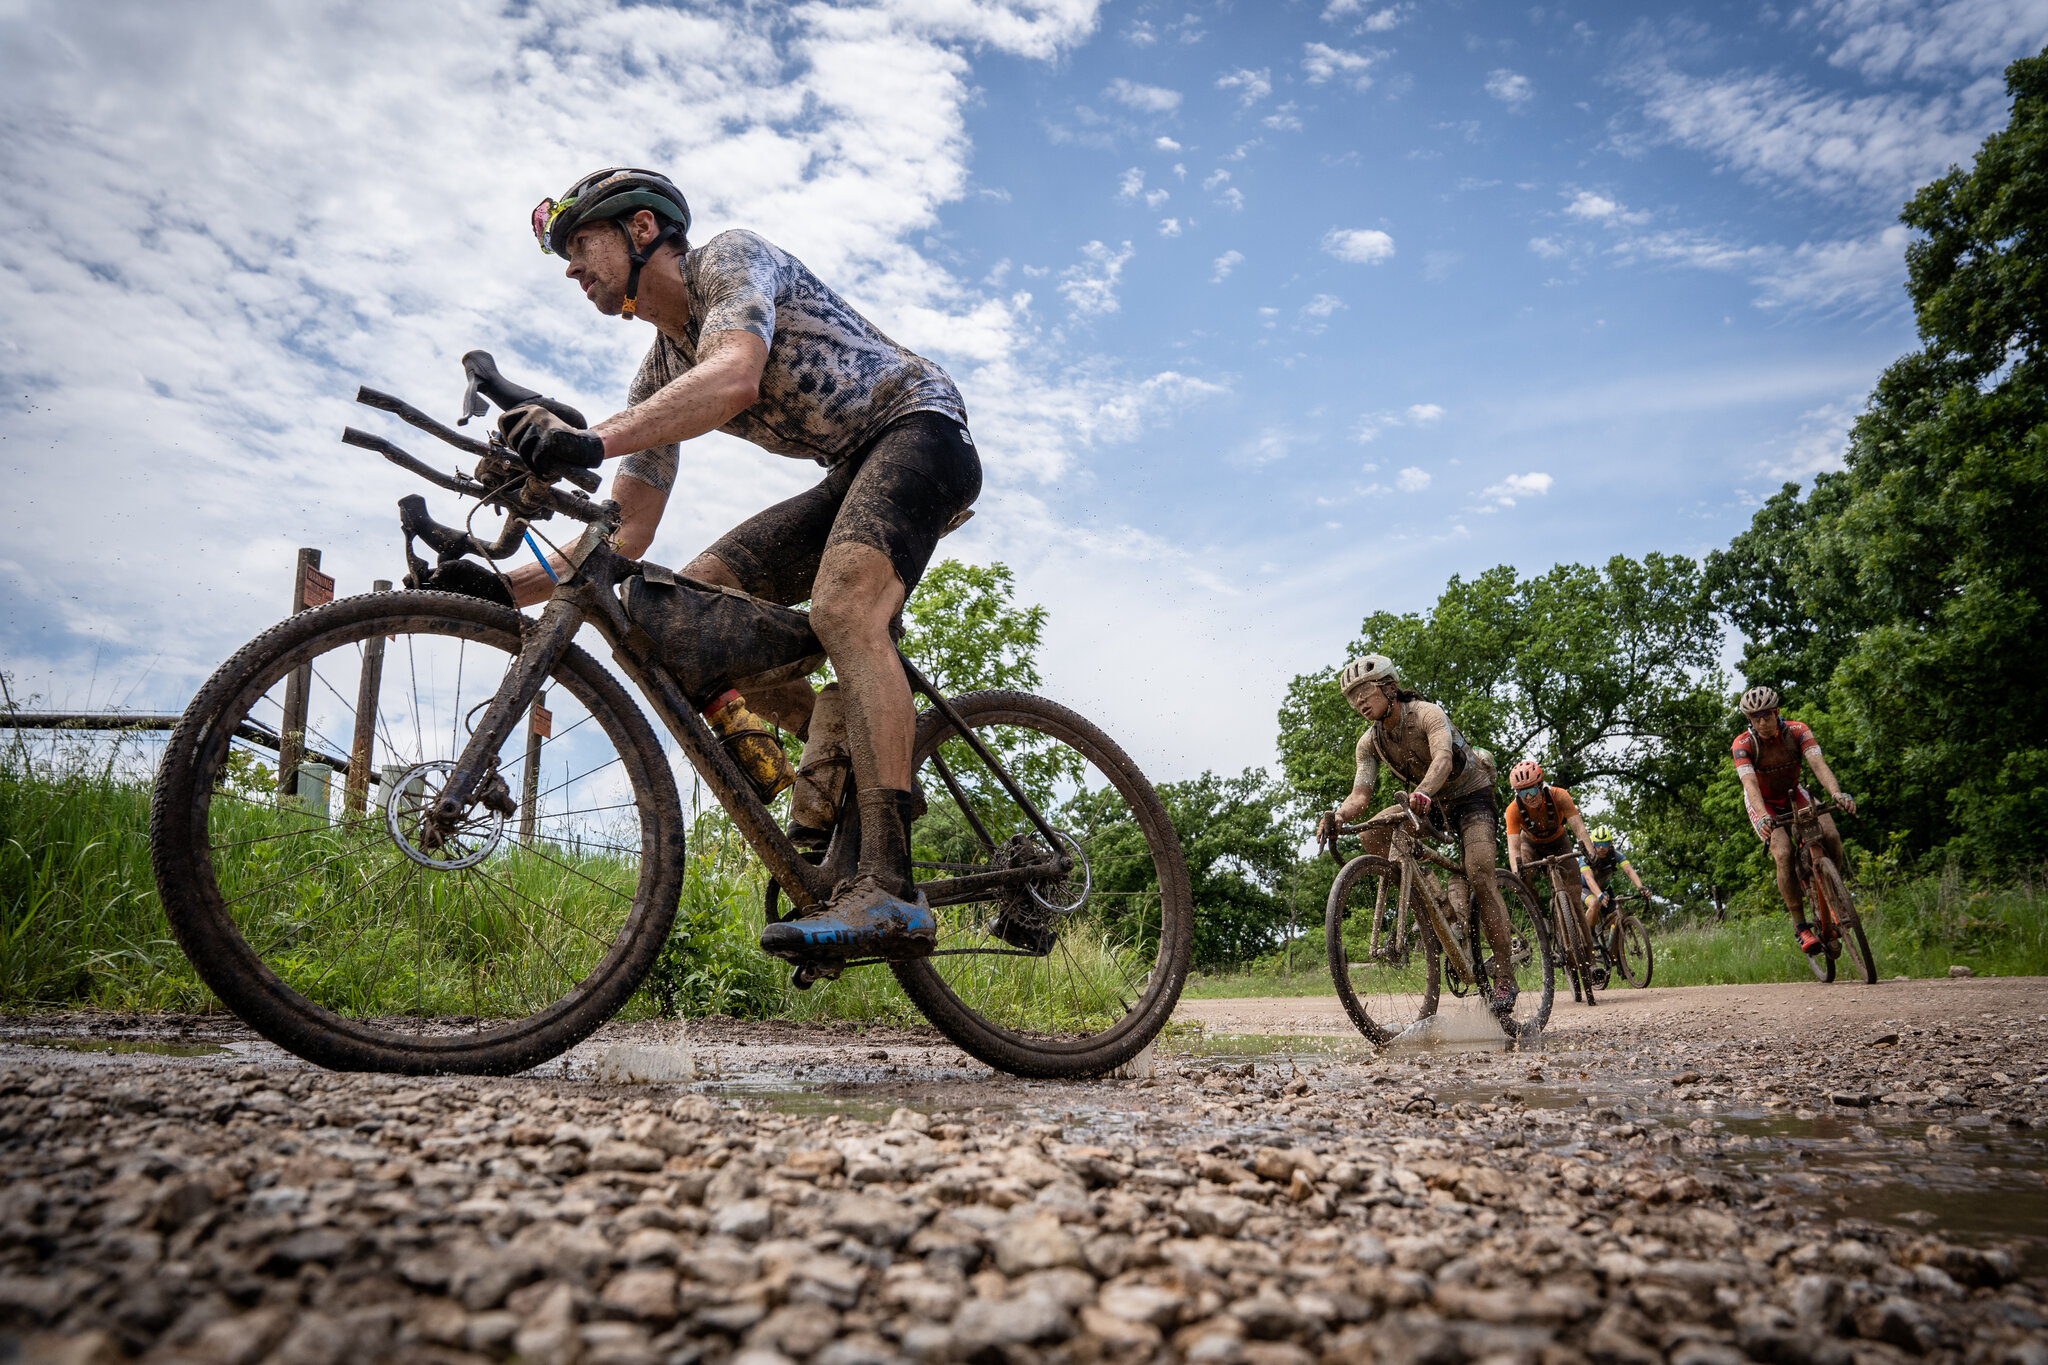 Gravel Bicycle Racing Nutrition: Fueling Strategies for Optimal Performance